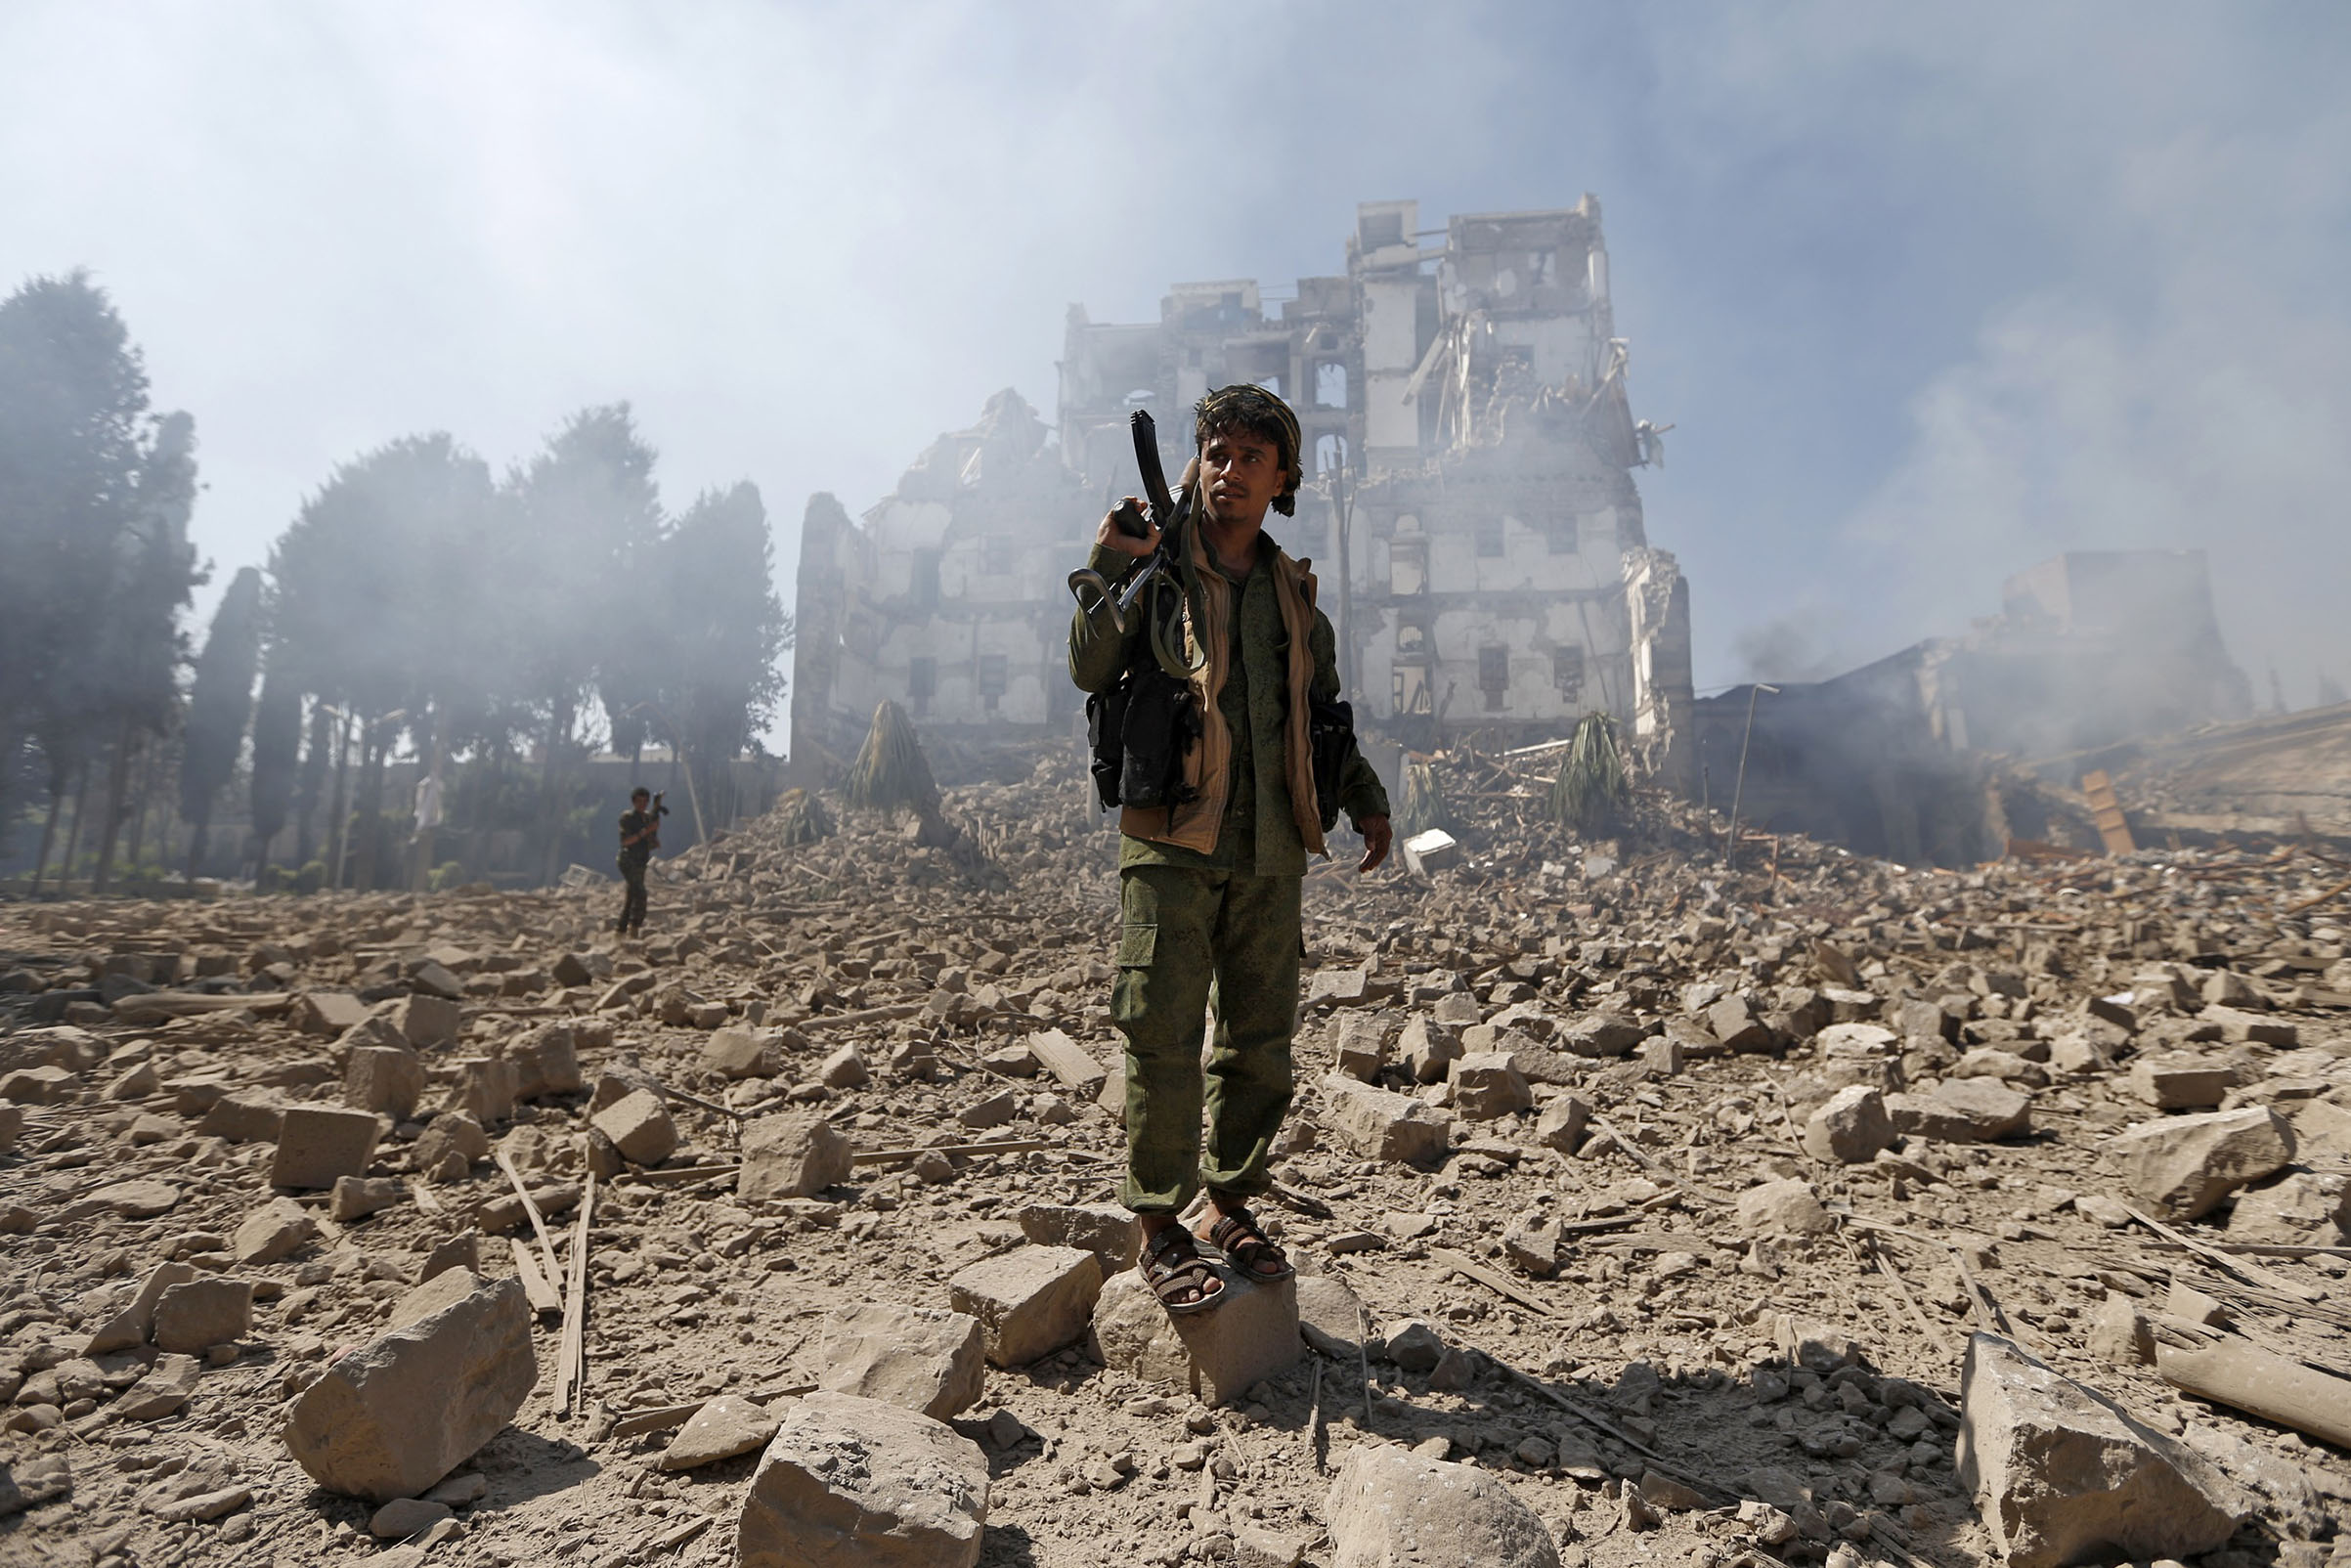 Houthi rebels in Sana’a after a reported airstrike by the Saudi-led coalition on Dec. 5, 2017 (AFP/Getty Images)